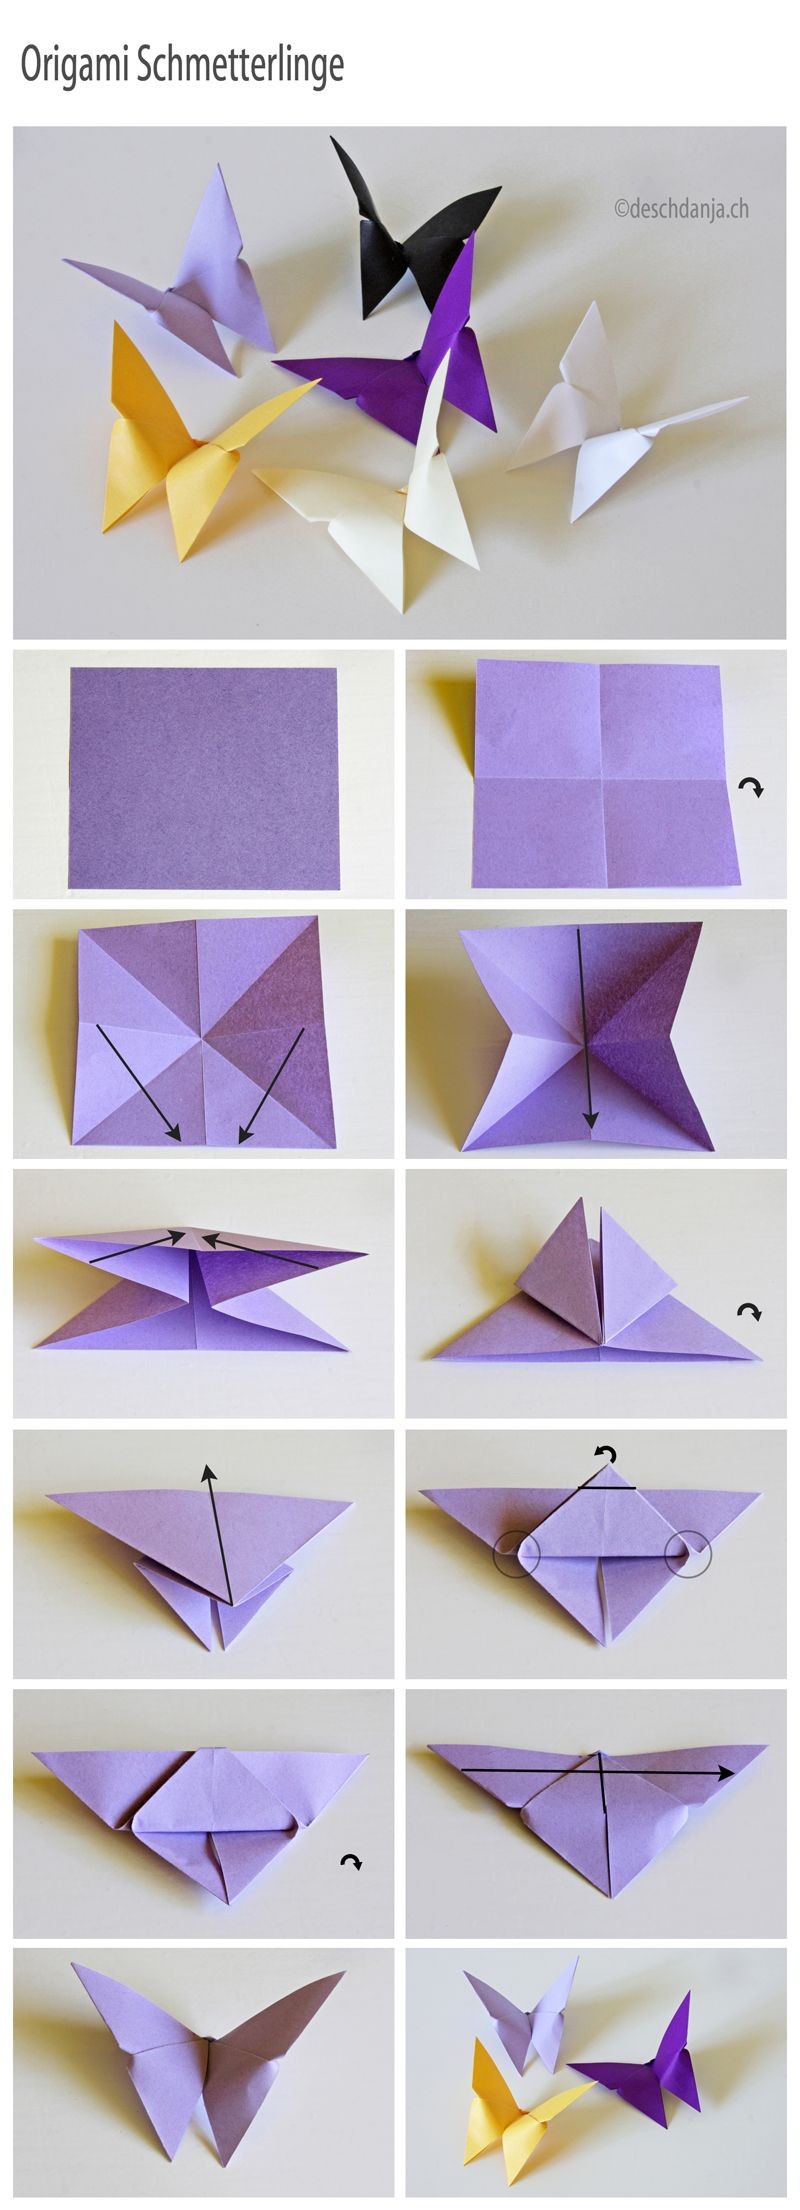 Papercraft Projects Easy Paper Craft Projects You Can Make with Kids